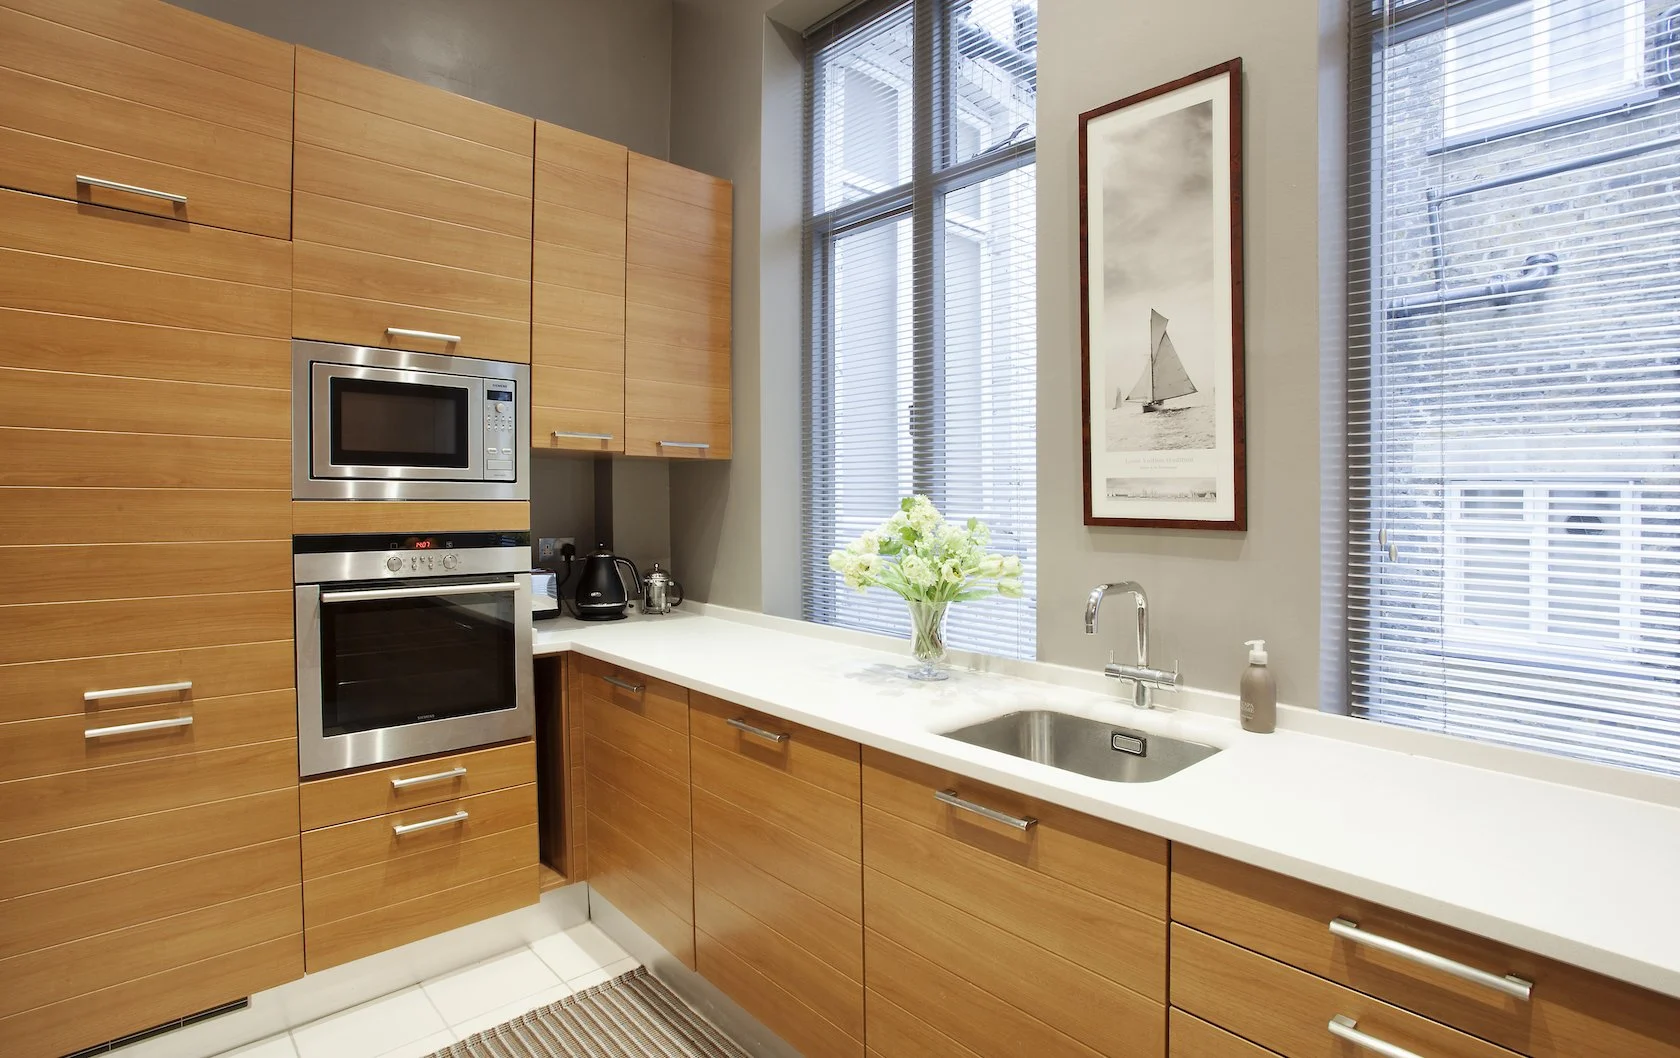 How to Buy Luxury London Kitchens